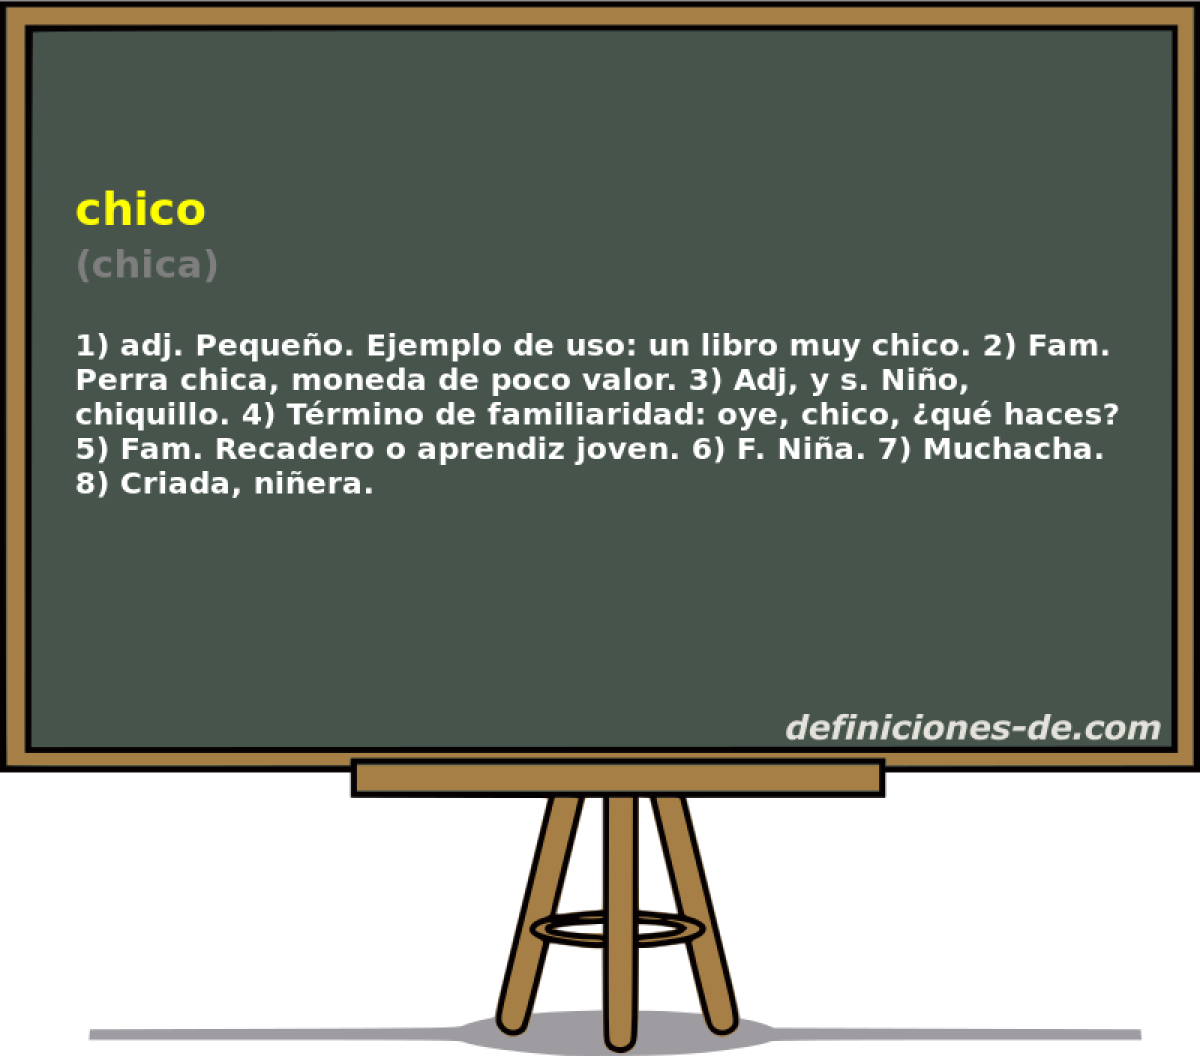 chico (chica)